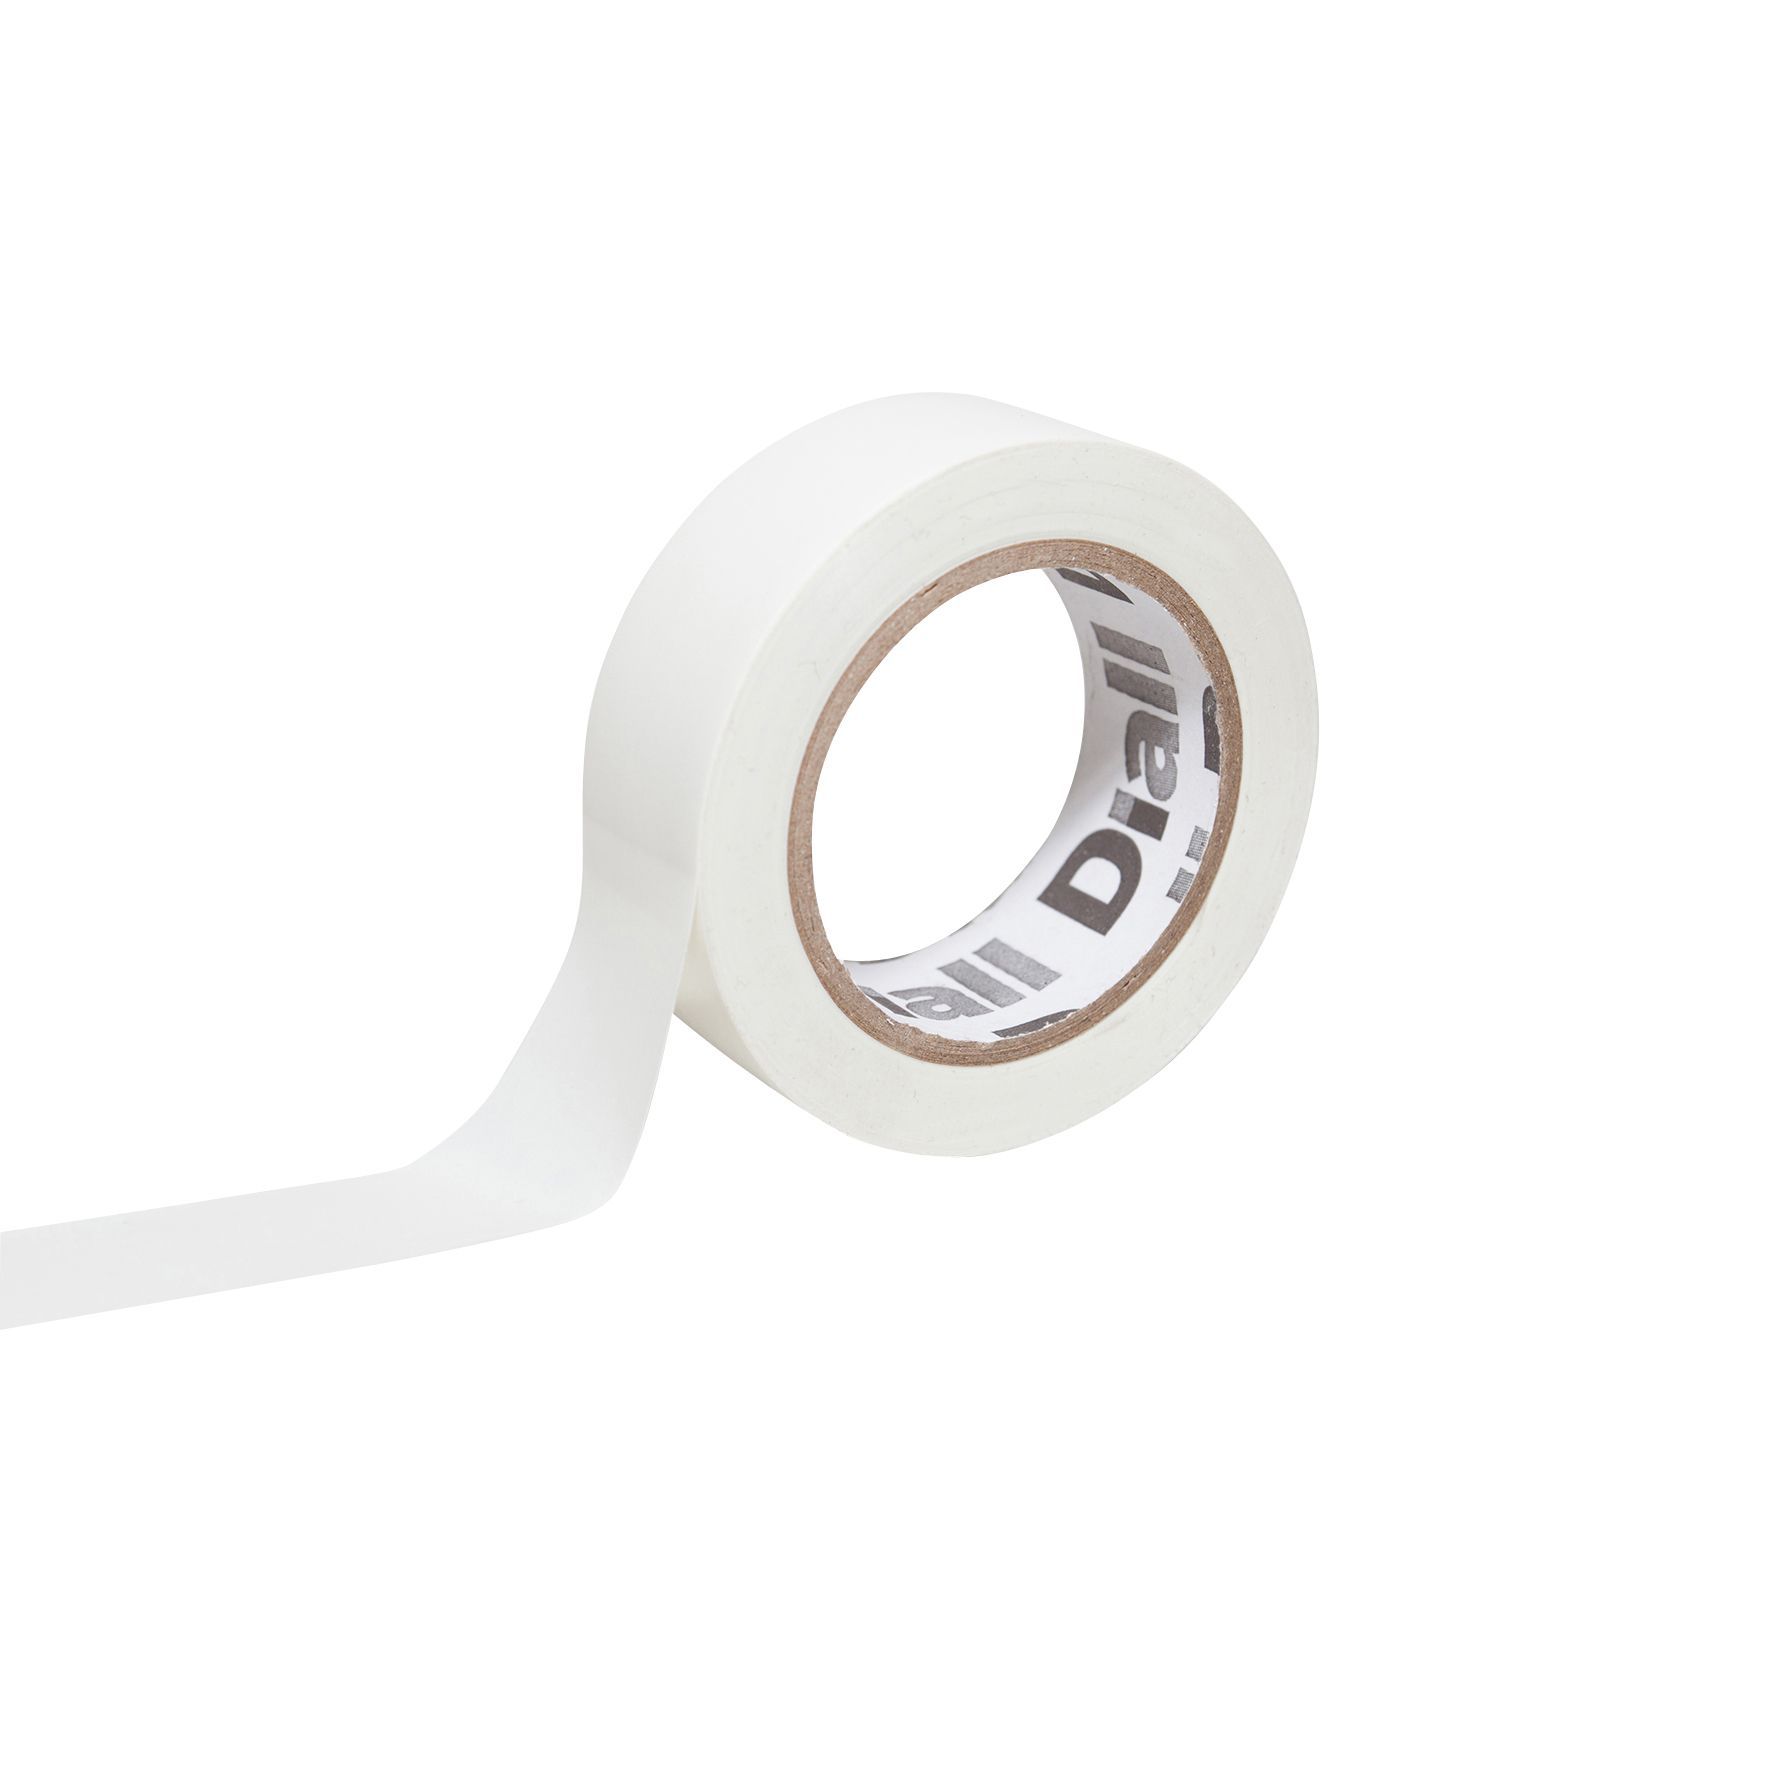 Diall White Electrical Tape L10m W19mm Departments Diy At Bandq